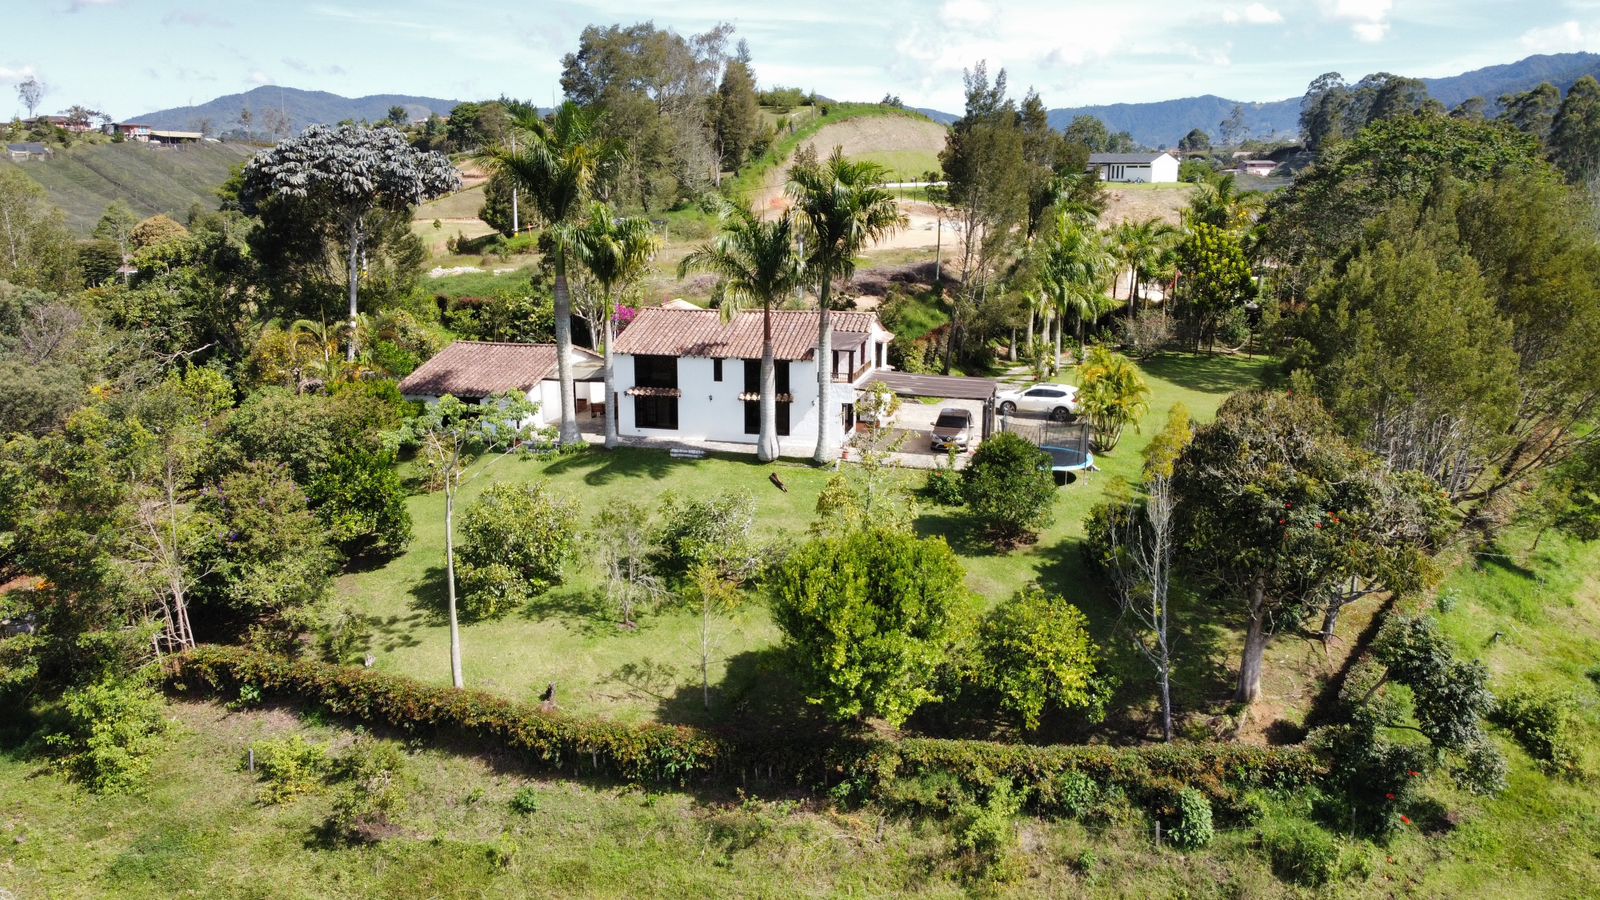 5BR, Two Level Traditional Finca One Hour East of Medellin With High Ceilings and Green Views